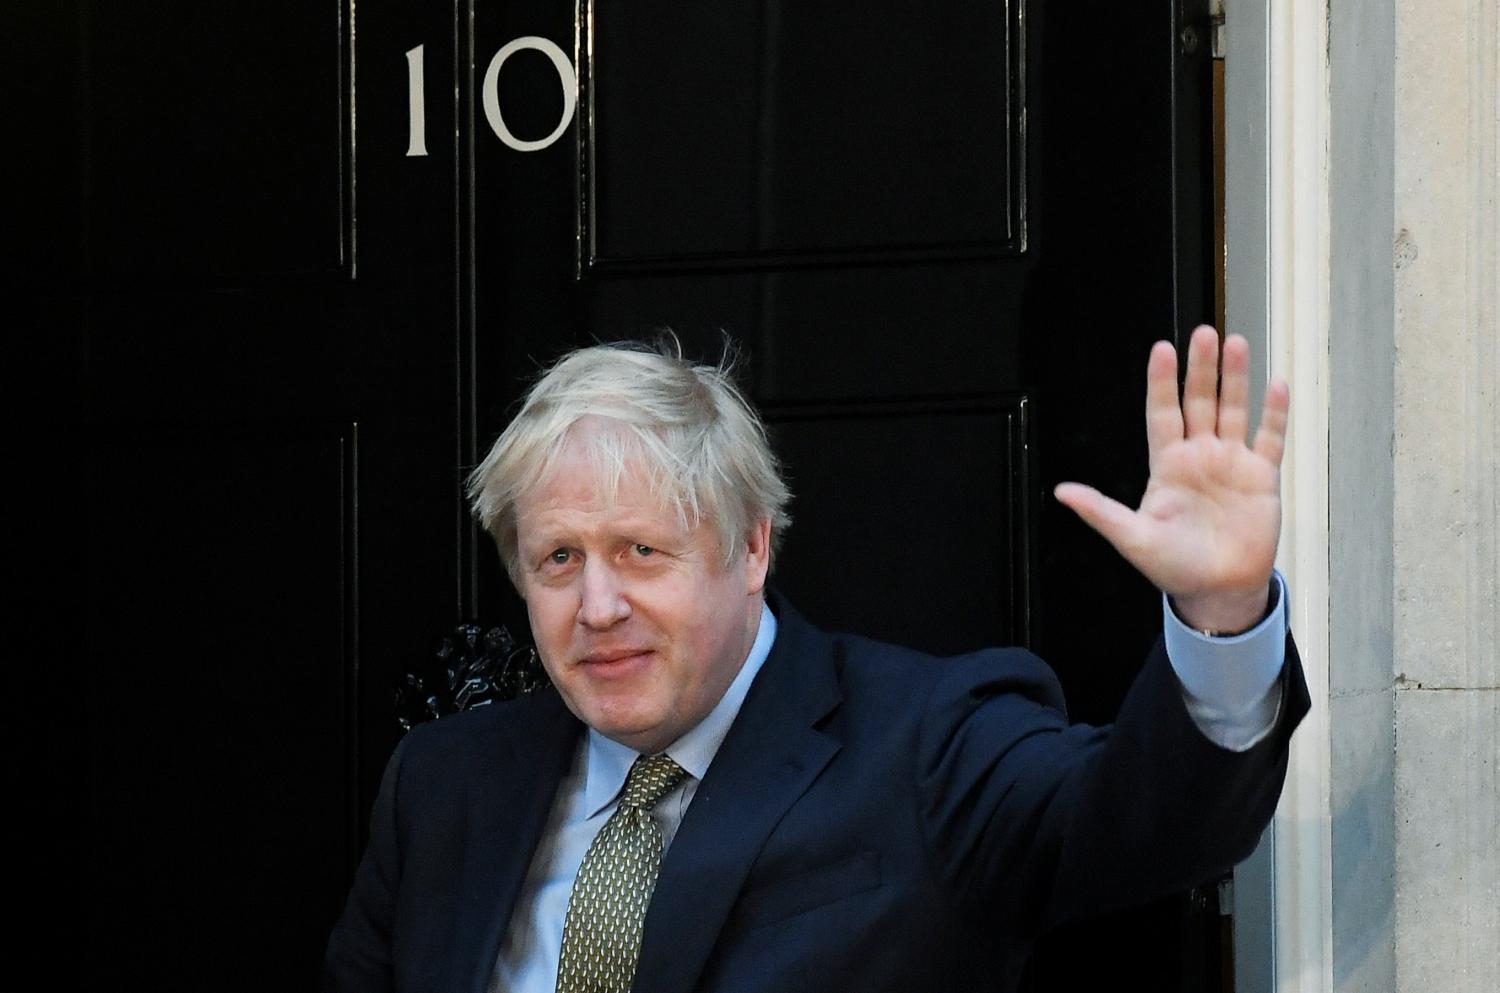 Britain's Prime Minister Boris Johnson waves after delivering a statement at Downing Street following winning the general election, in London, Britain, December 13, 2019. REUTERS/Toby Melville - RC2FUD9K5160